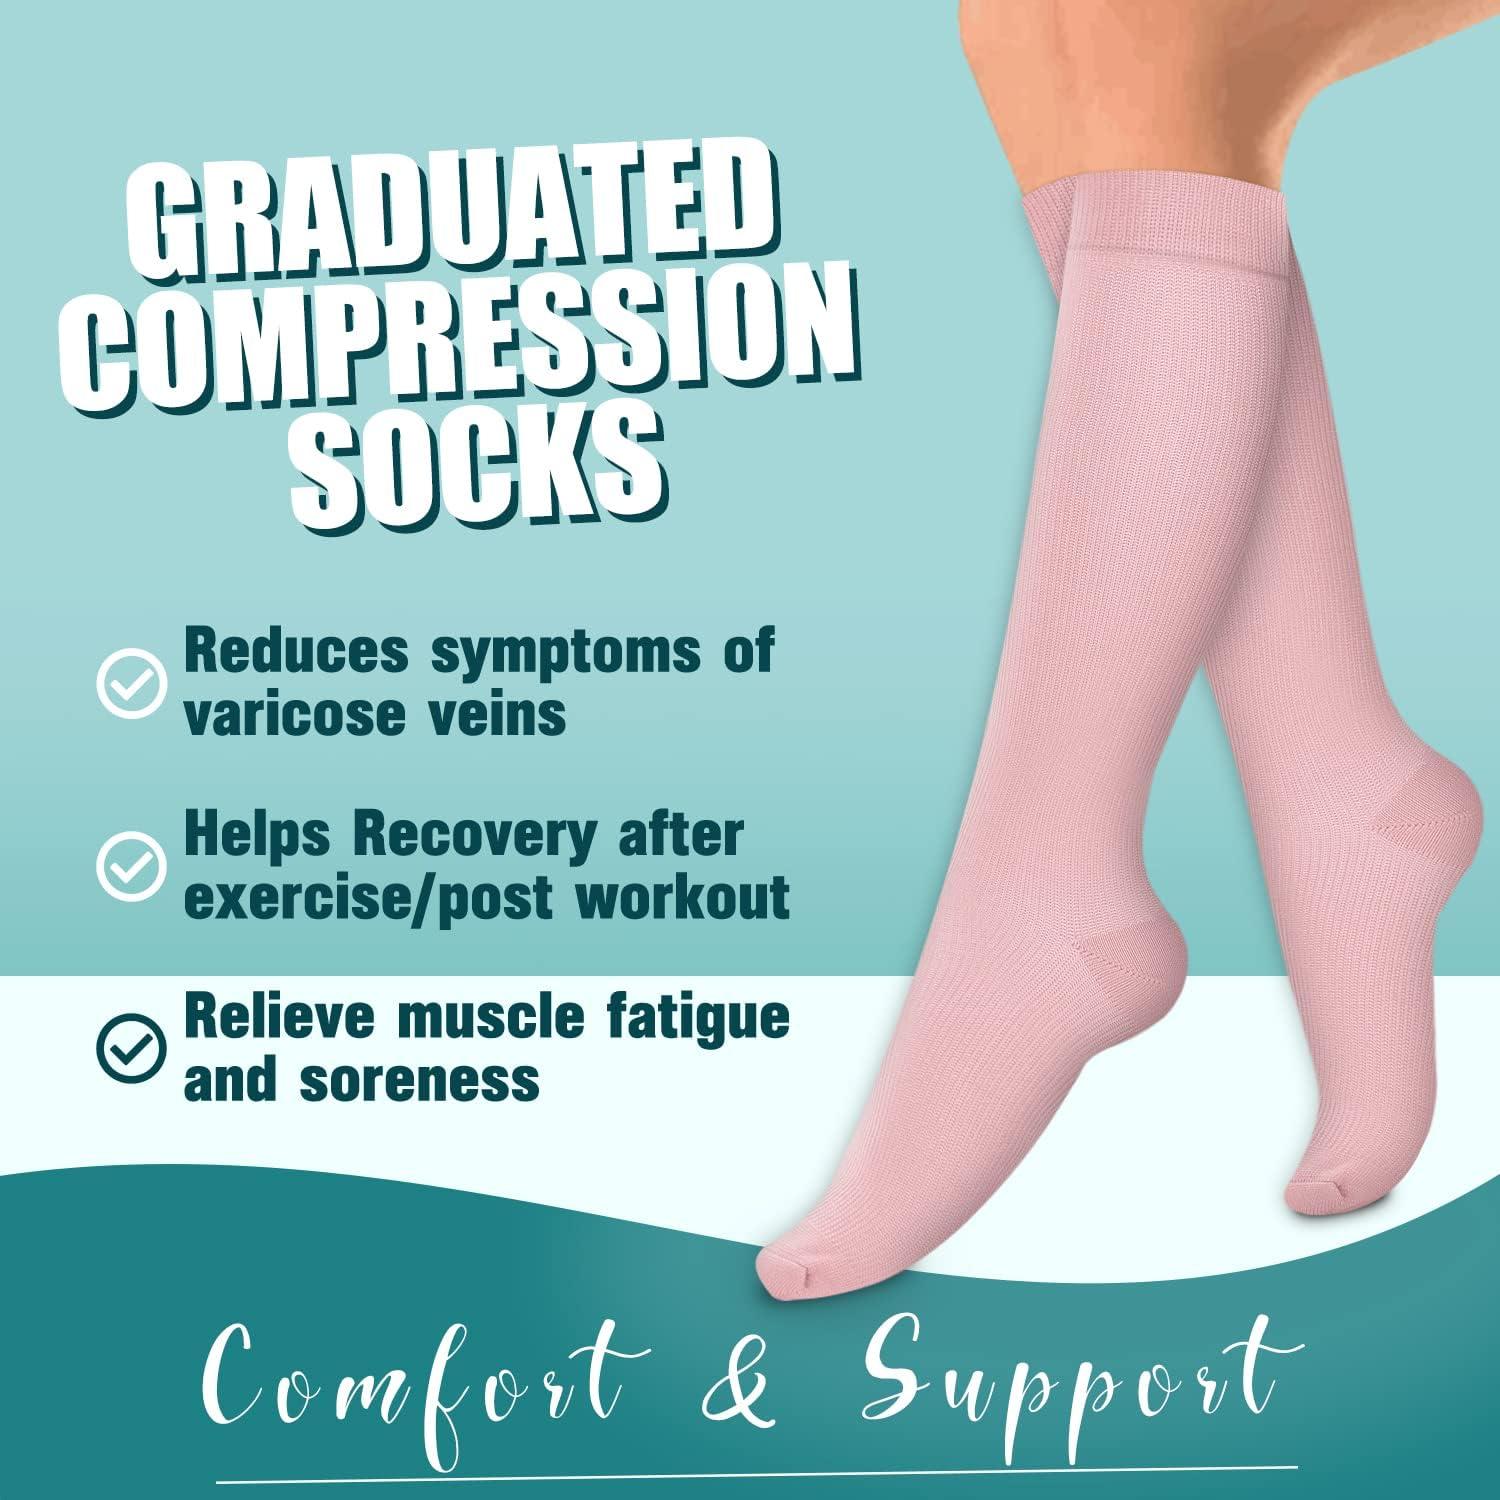 Laite Hebe 4 Pairs-Compression Socks for Women&Men Circulation-Best Support  for Nurses,Running,Athletic Assorted18 Large-X-Large